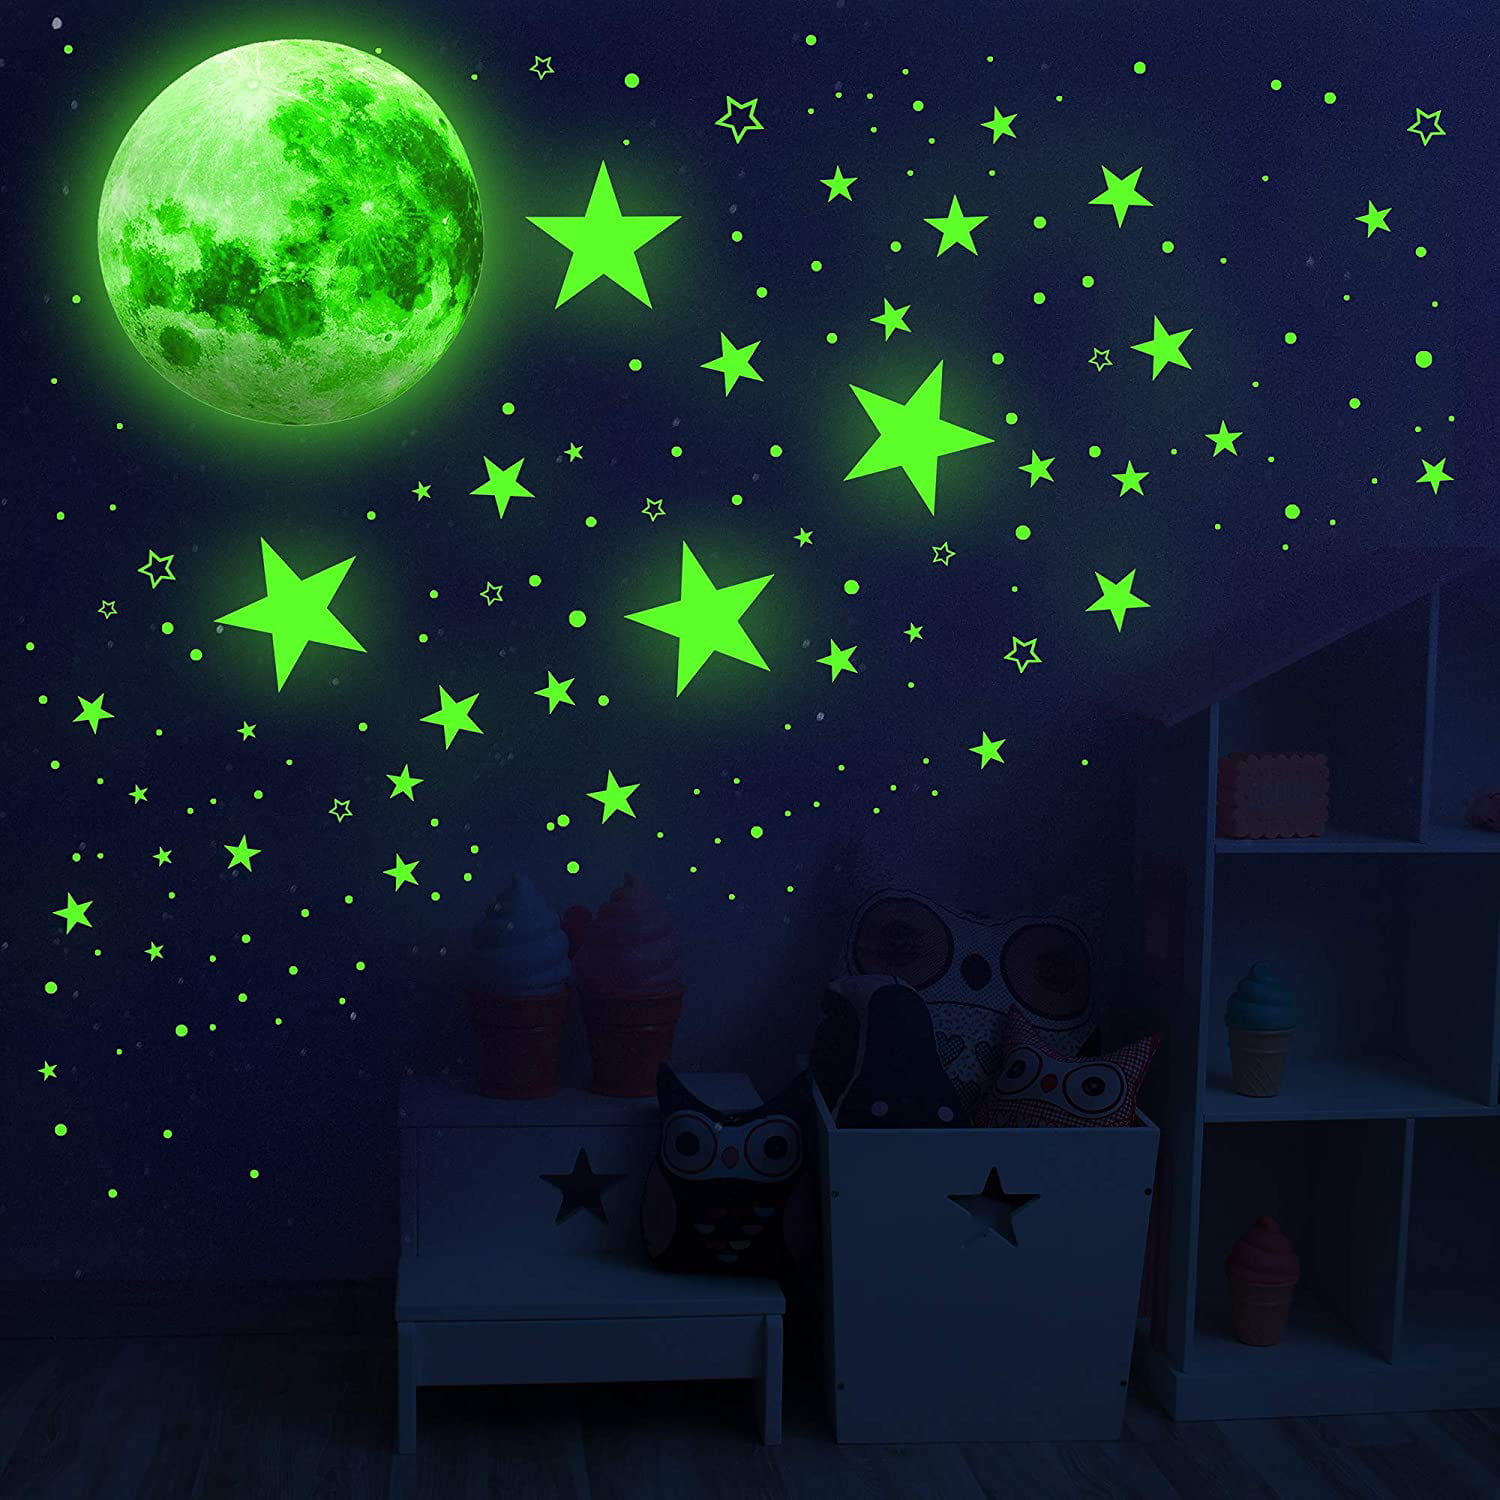 Glow in The Dark Stickers for Ceiling, 625Pcs Dark Stars and Moon Decals  Wall Stickers Solar System Shining Decoration, Glowing in The Dark Ceiling